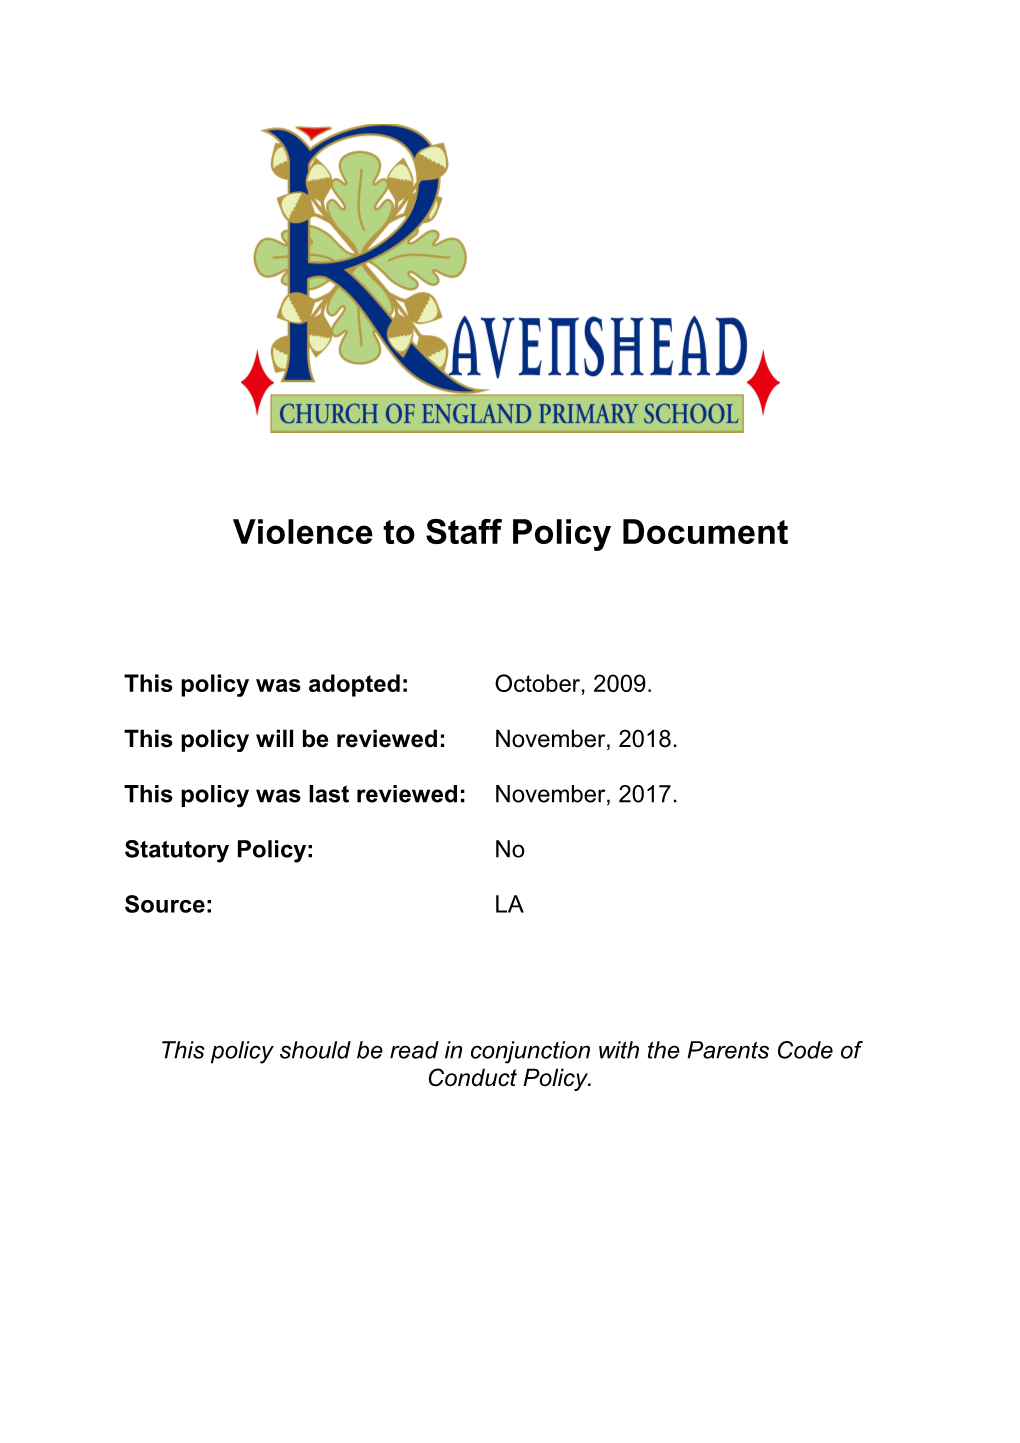 Violence to Staff Policy